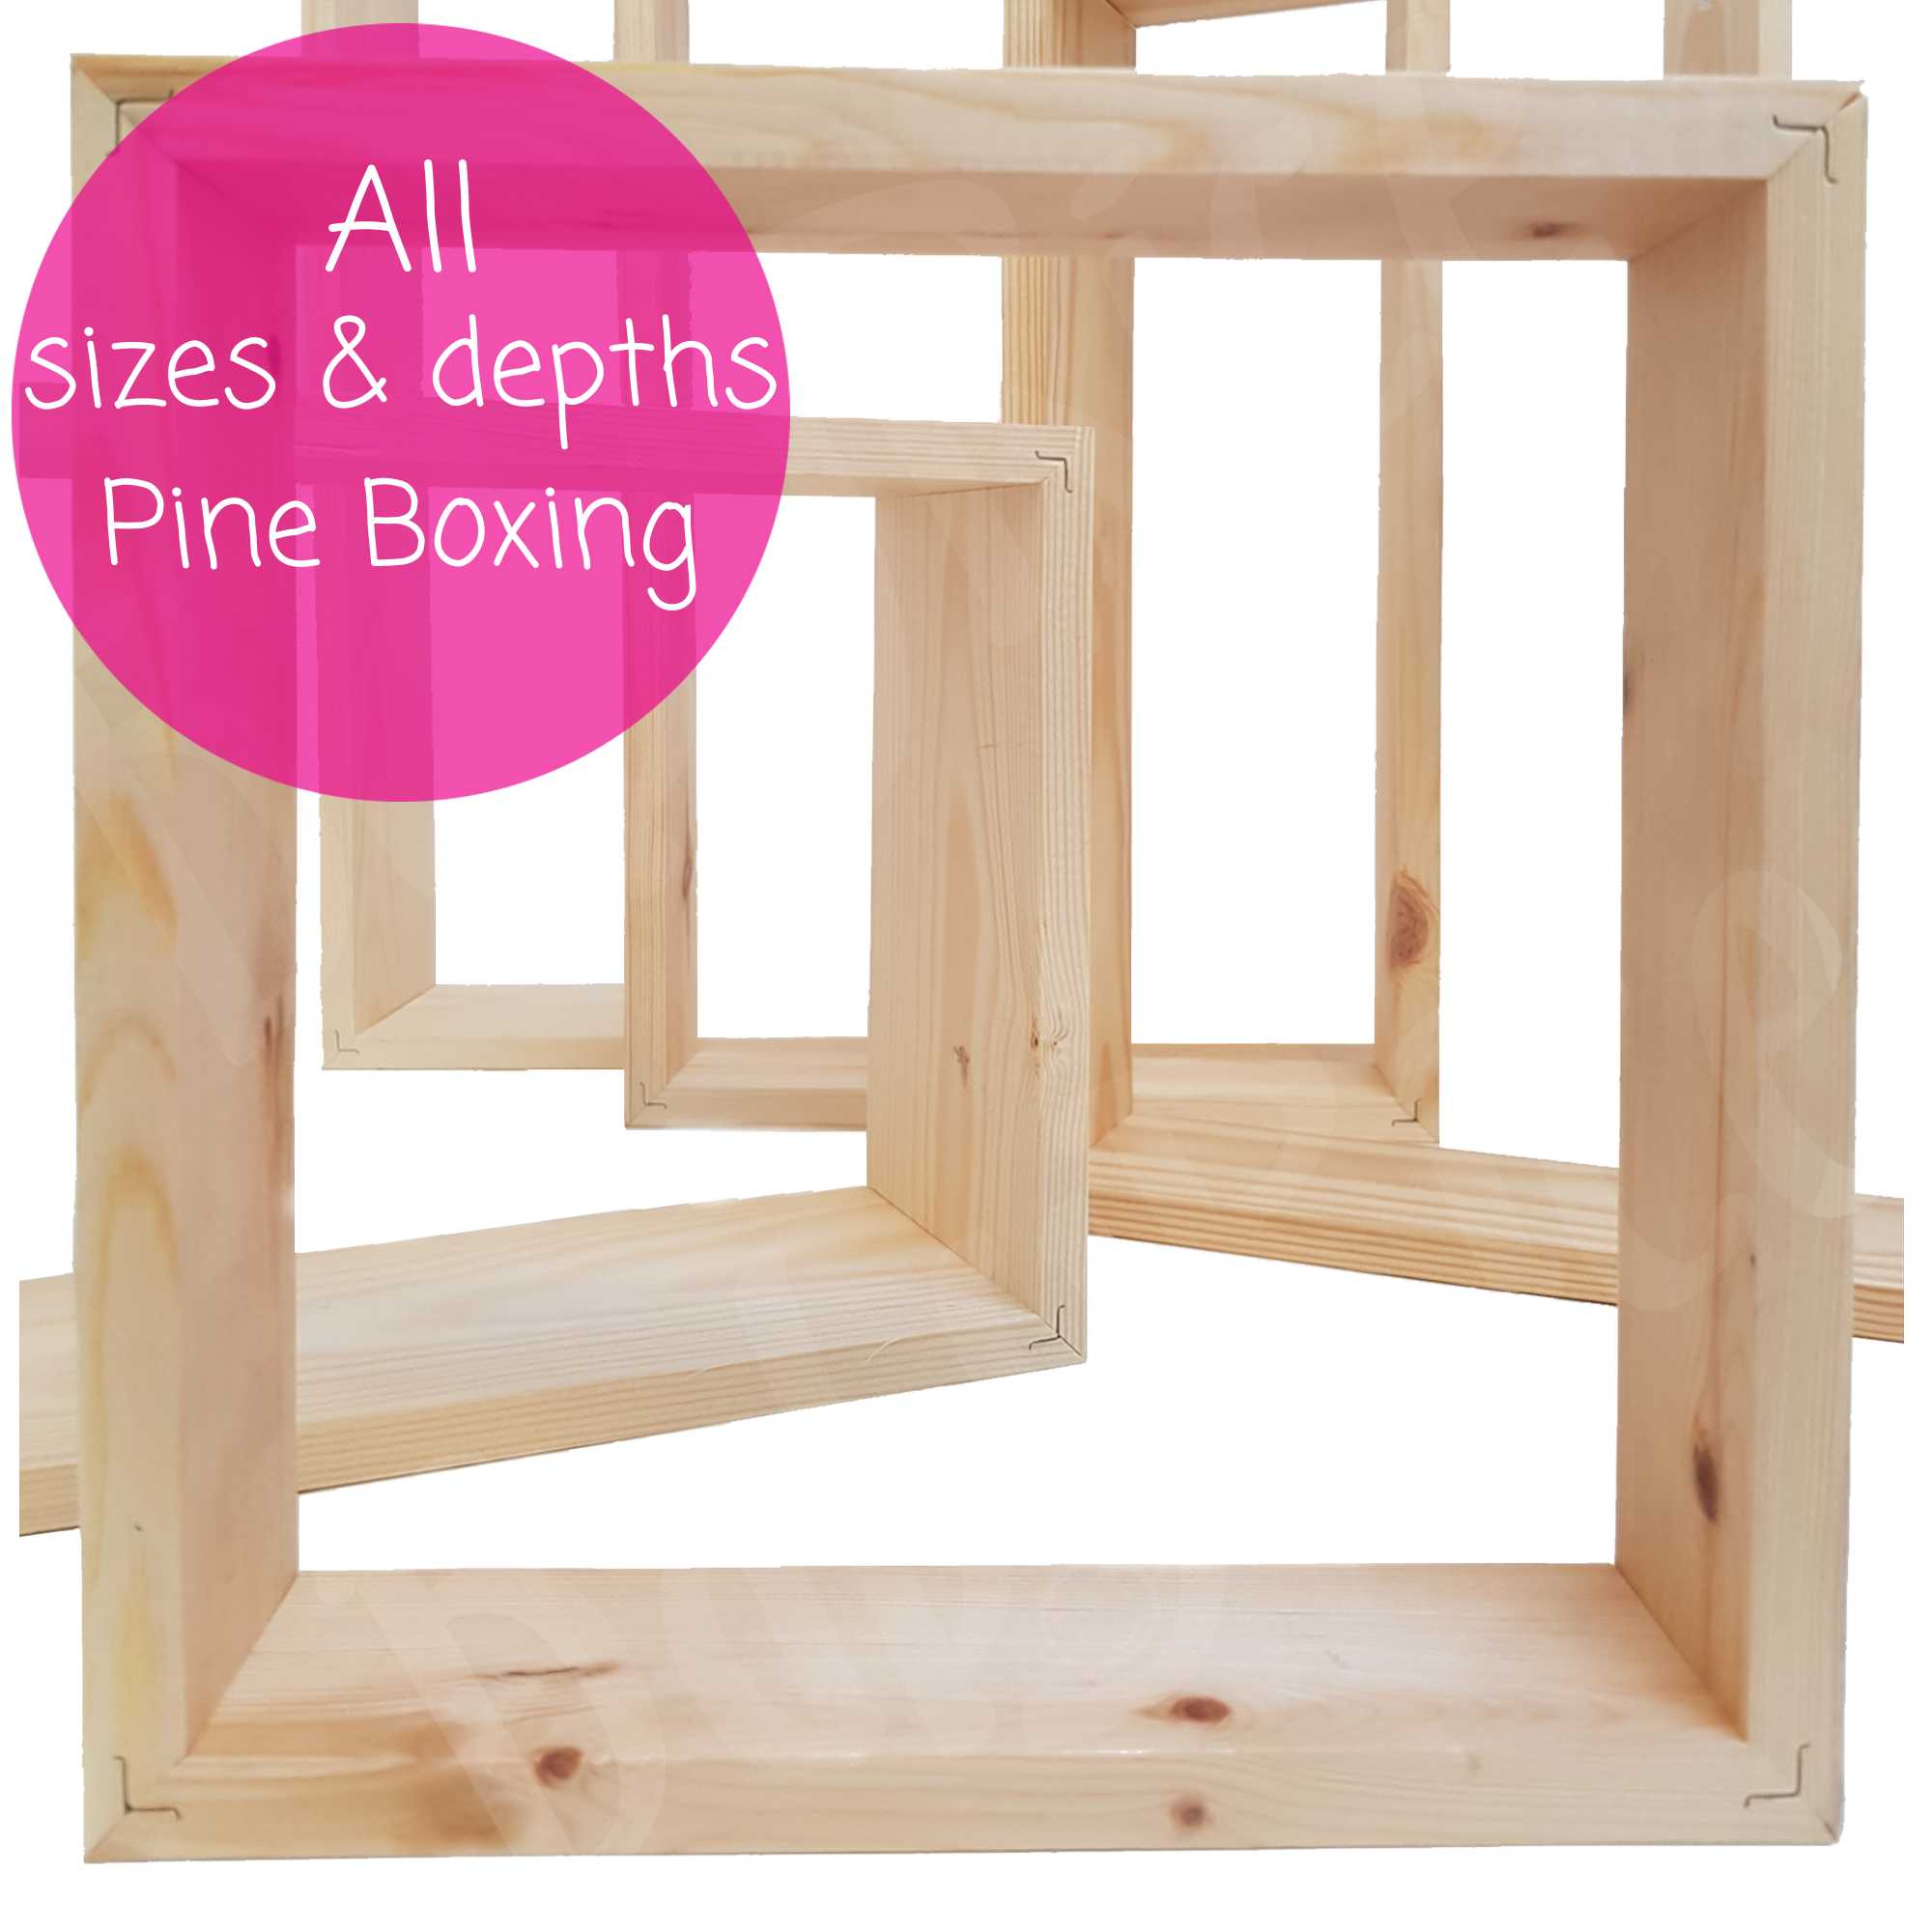 Pine boxing to make a deeper shadow box frame